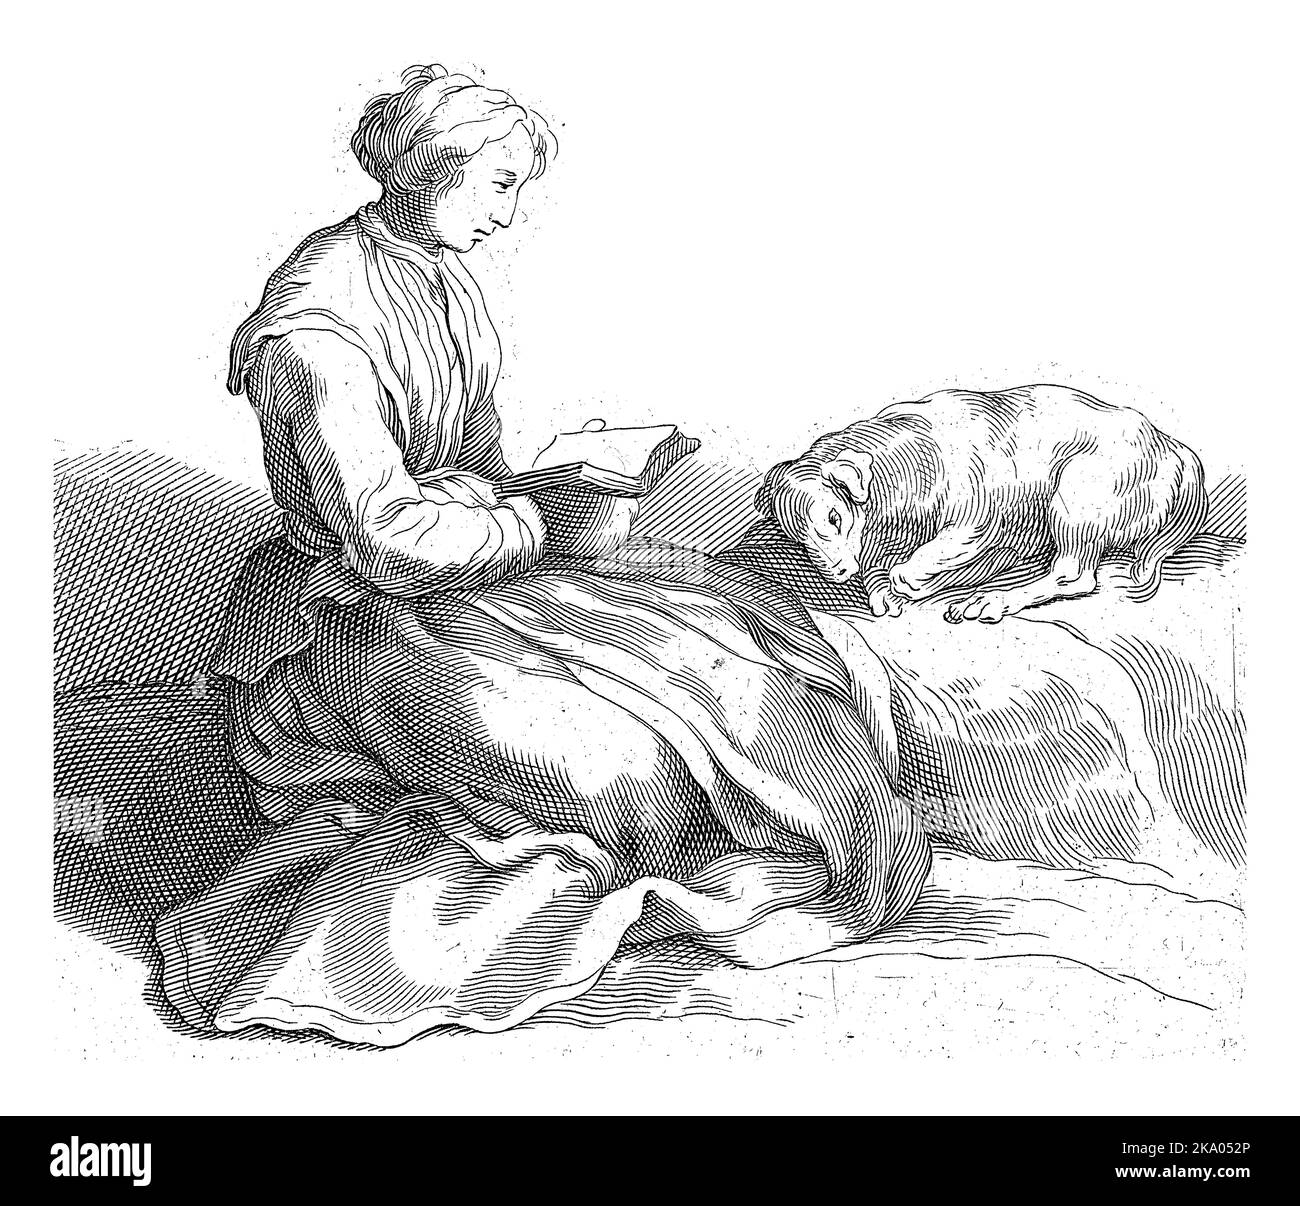 A woman is reading on the floor, a dog is sleeping next to her. Stock Photo